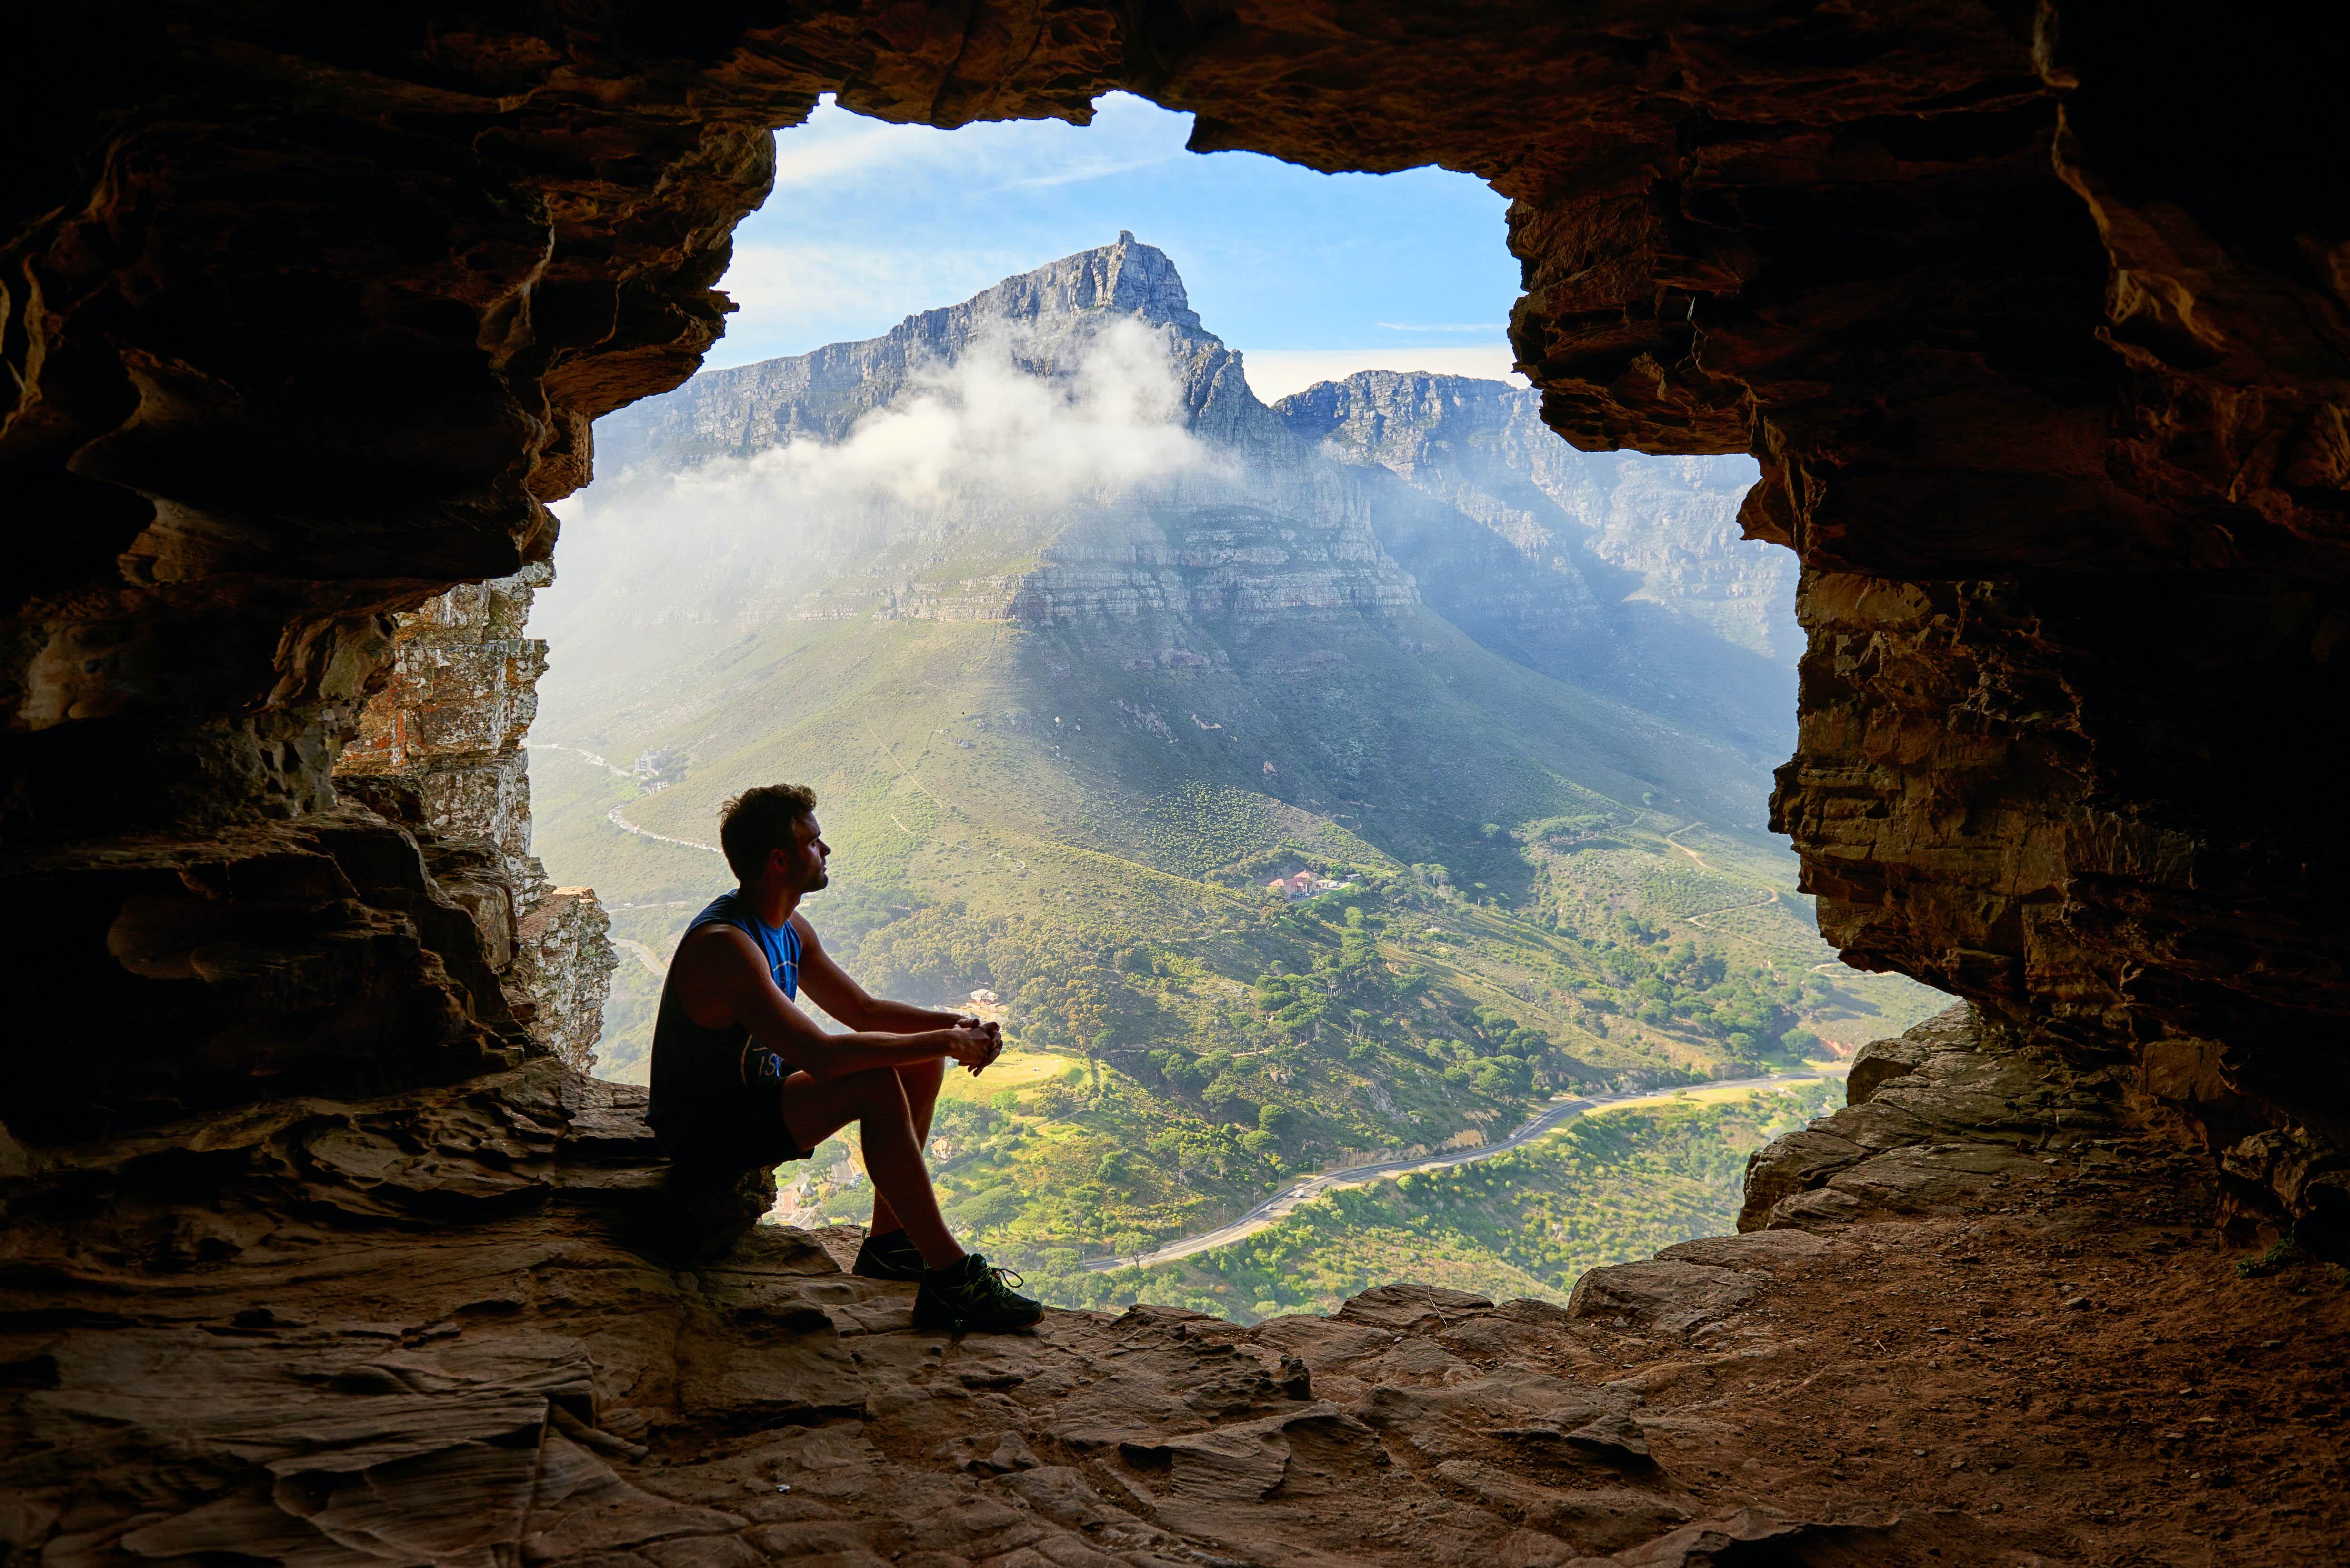 man in hiking gear sits in a natural cave and looks out at a natural monuntain vista